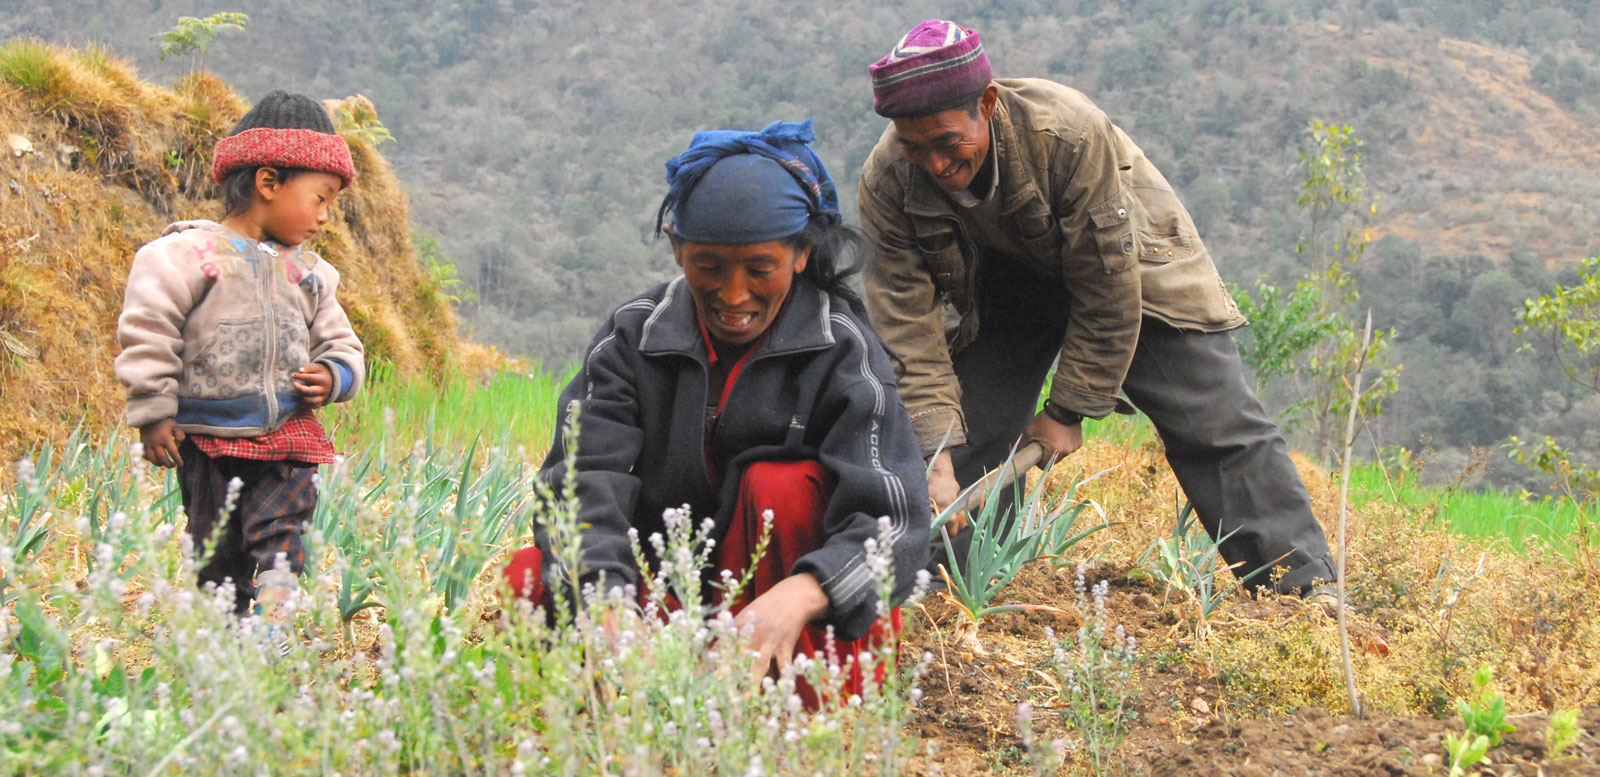 Happiness Despite Hard Work - A Typical Nepalese Characteristic